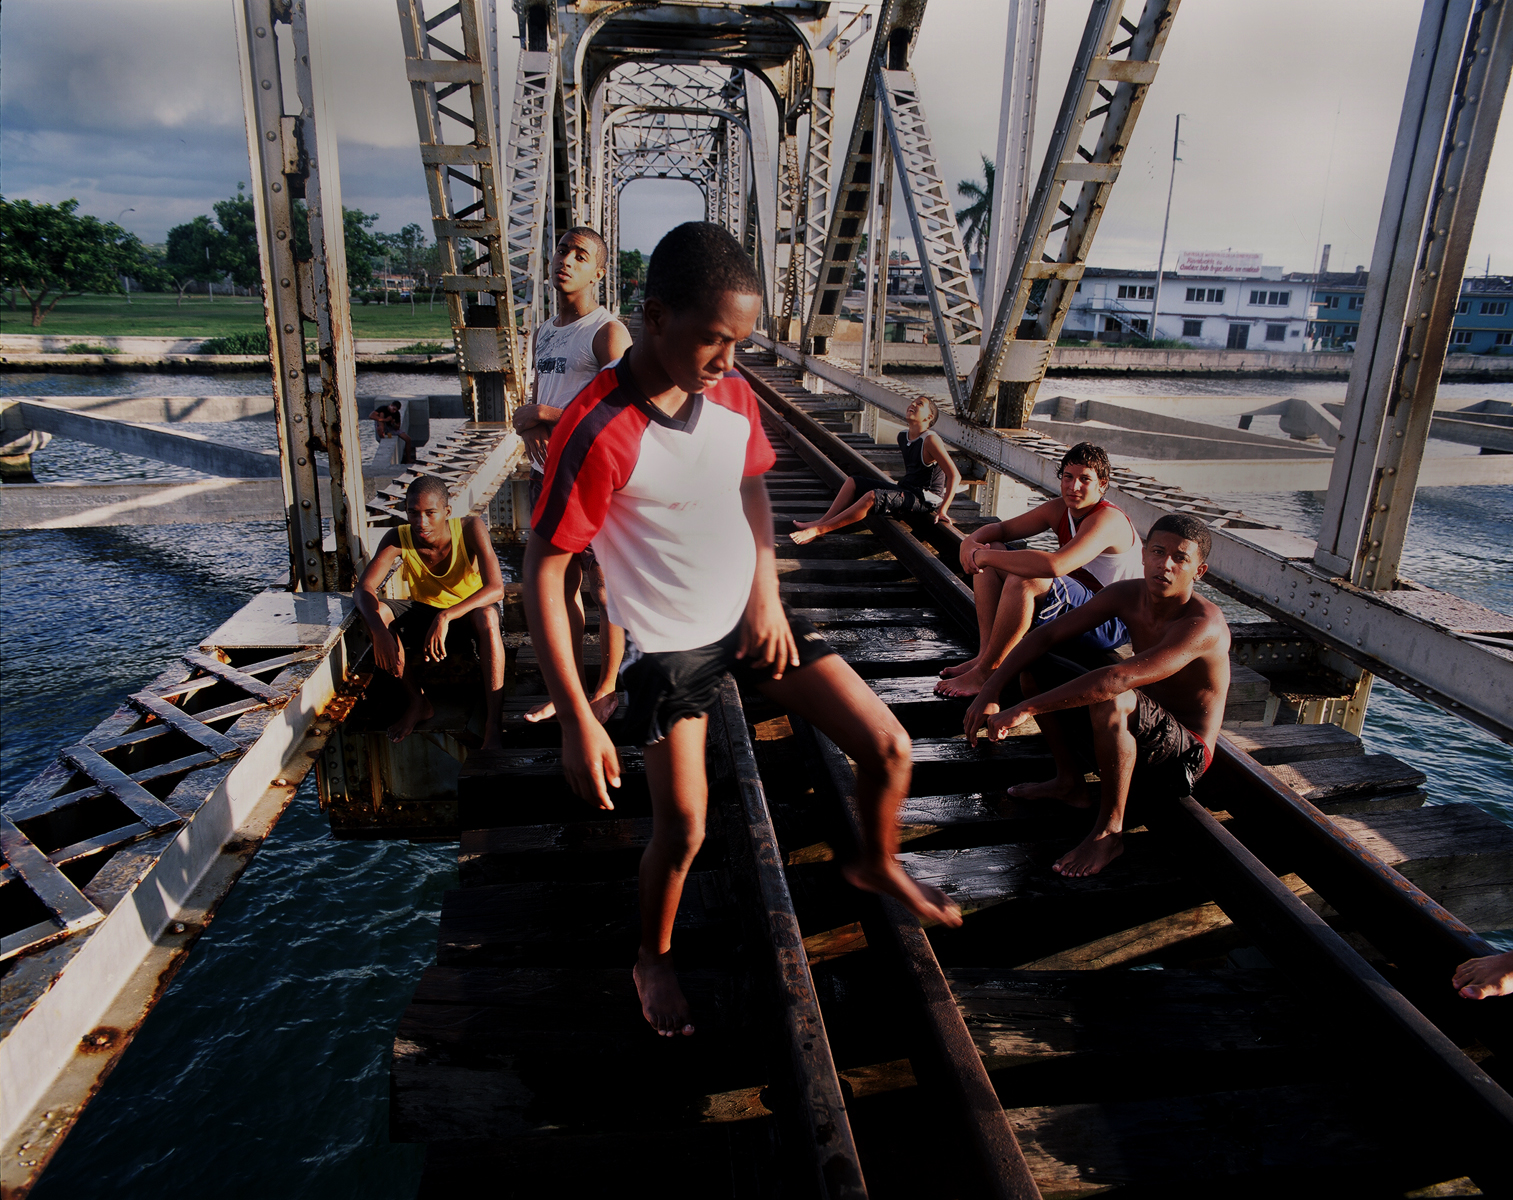 A teenage boy adjusts himself, while the other boys sit and talk, while resting or wating for their turn to jump from the railway bridge into waterway below. Both the railway bridge and waterway are used for commerical purposes by freight trains and commercial cargo ships. These teenage boys jump and swim at their own risk due to a lack of laws, police enforcement, or opportunites for jobs or educational summer camps.Mantanzas, Cuba